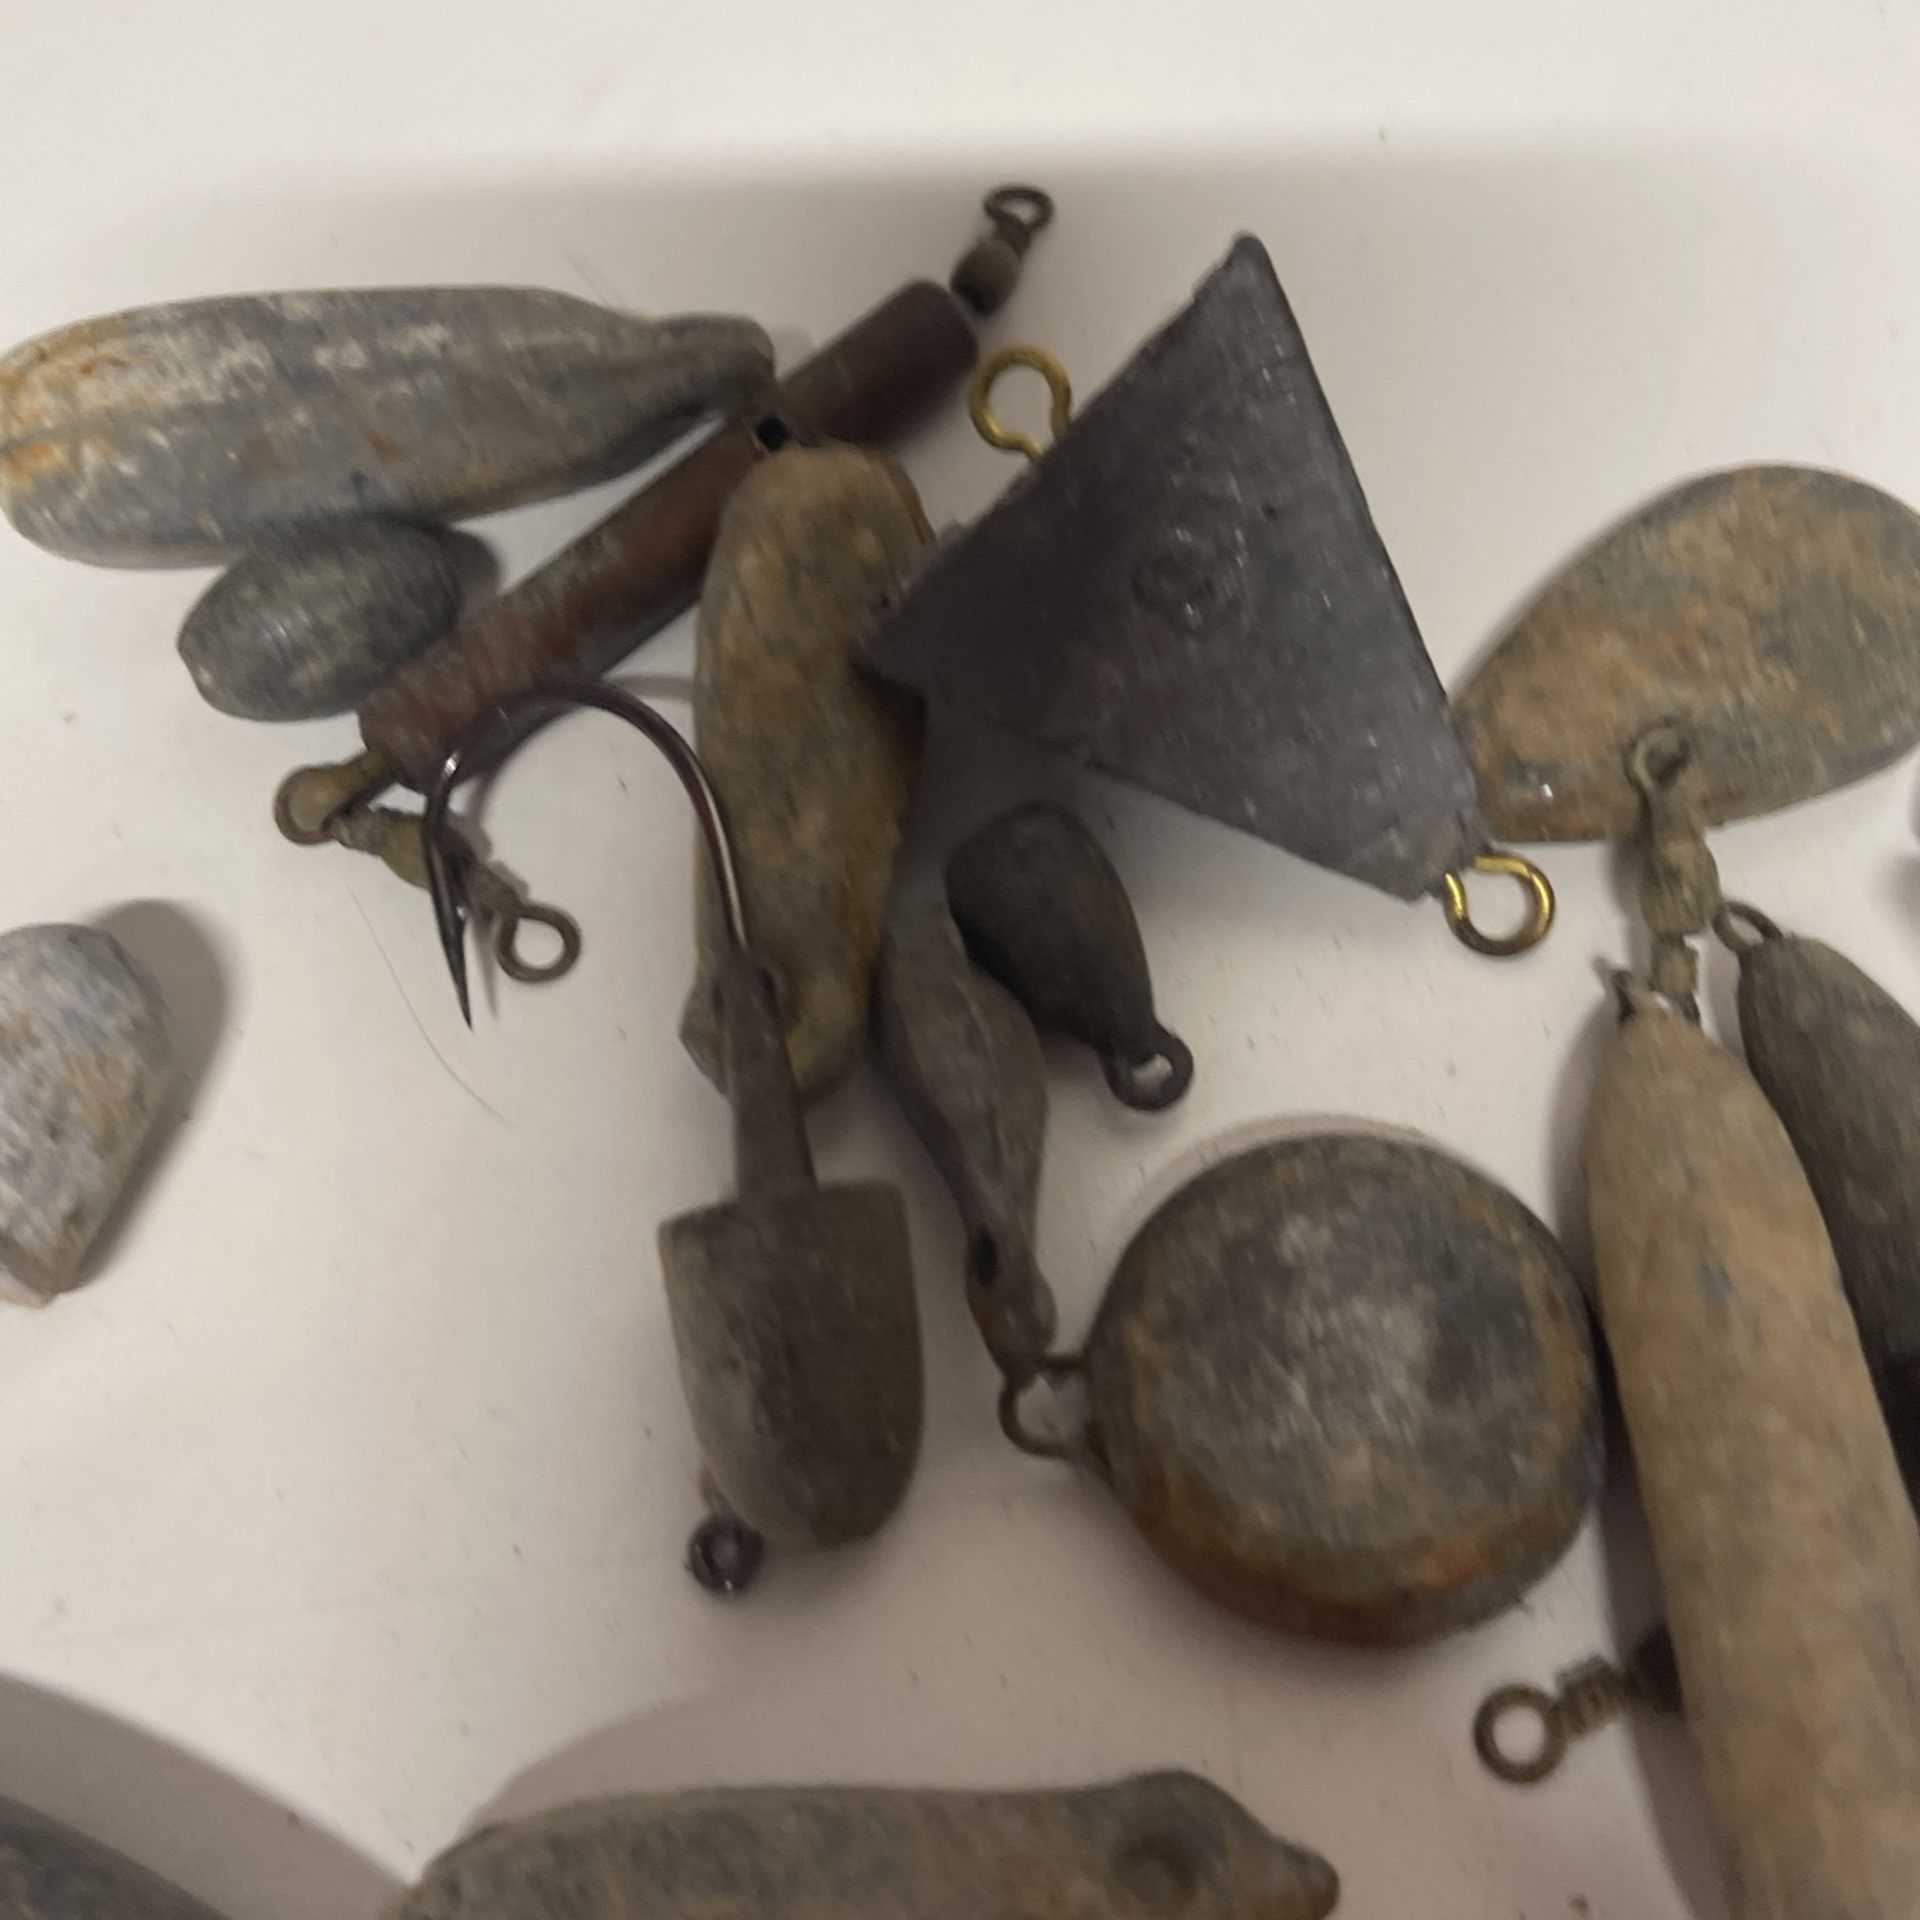 Vintage Fishing Sinkers 15 for Sale in Dixon, CA - OfferUp